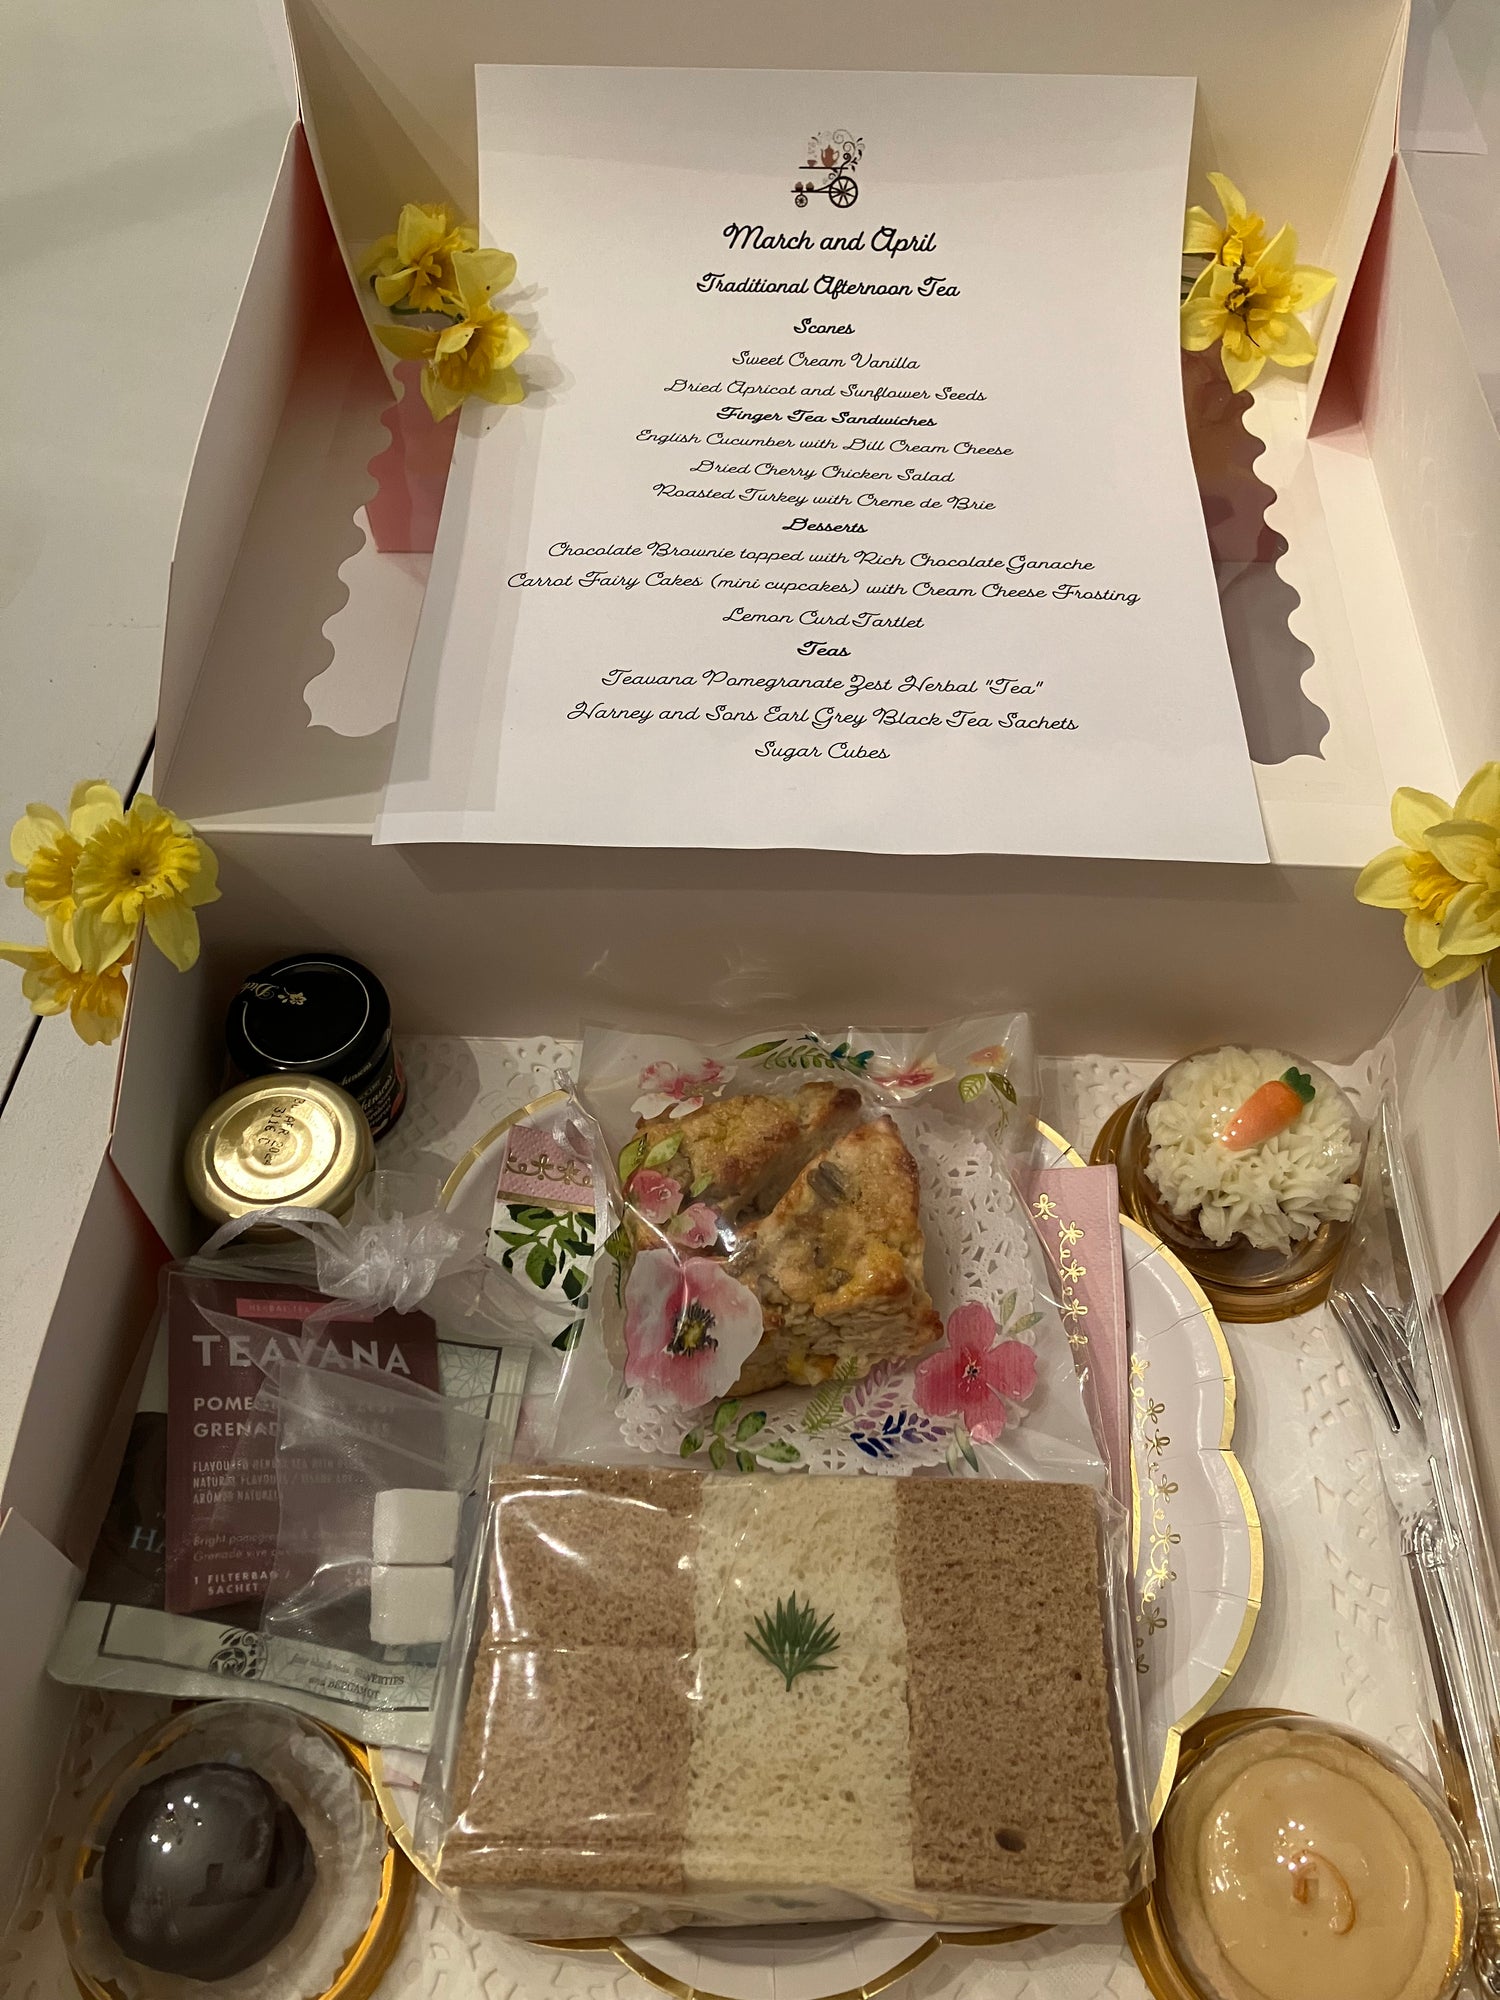 March and April Afternoon Tea Box